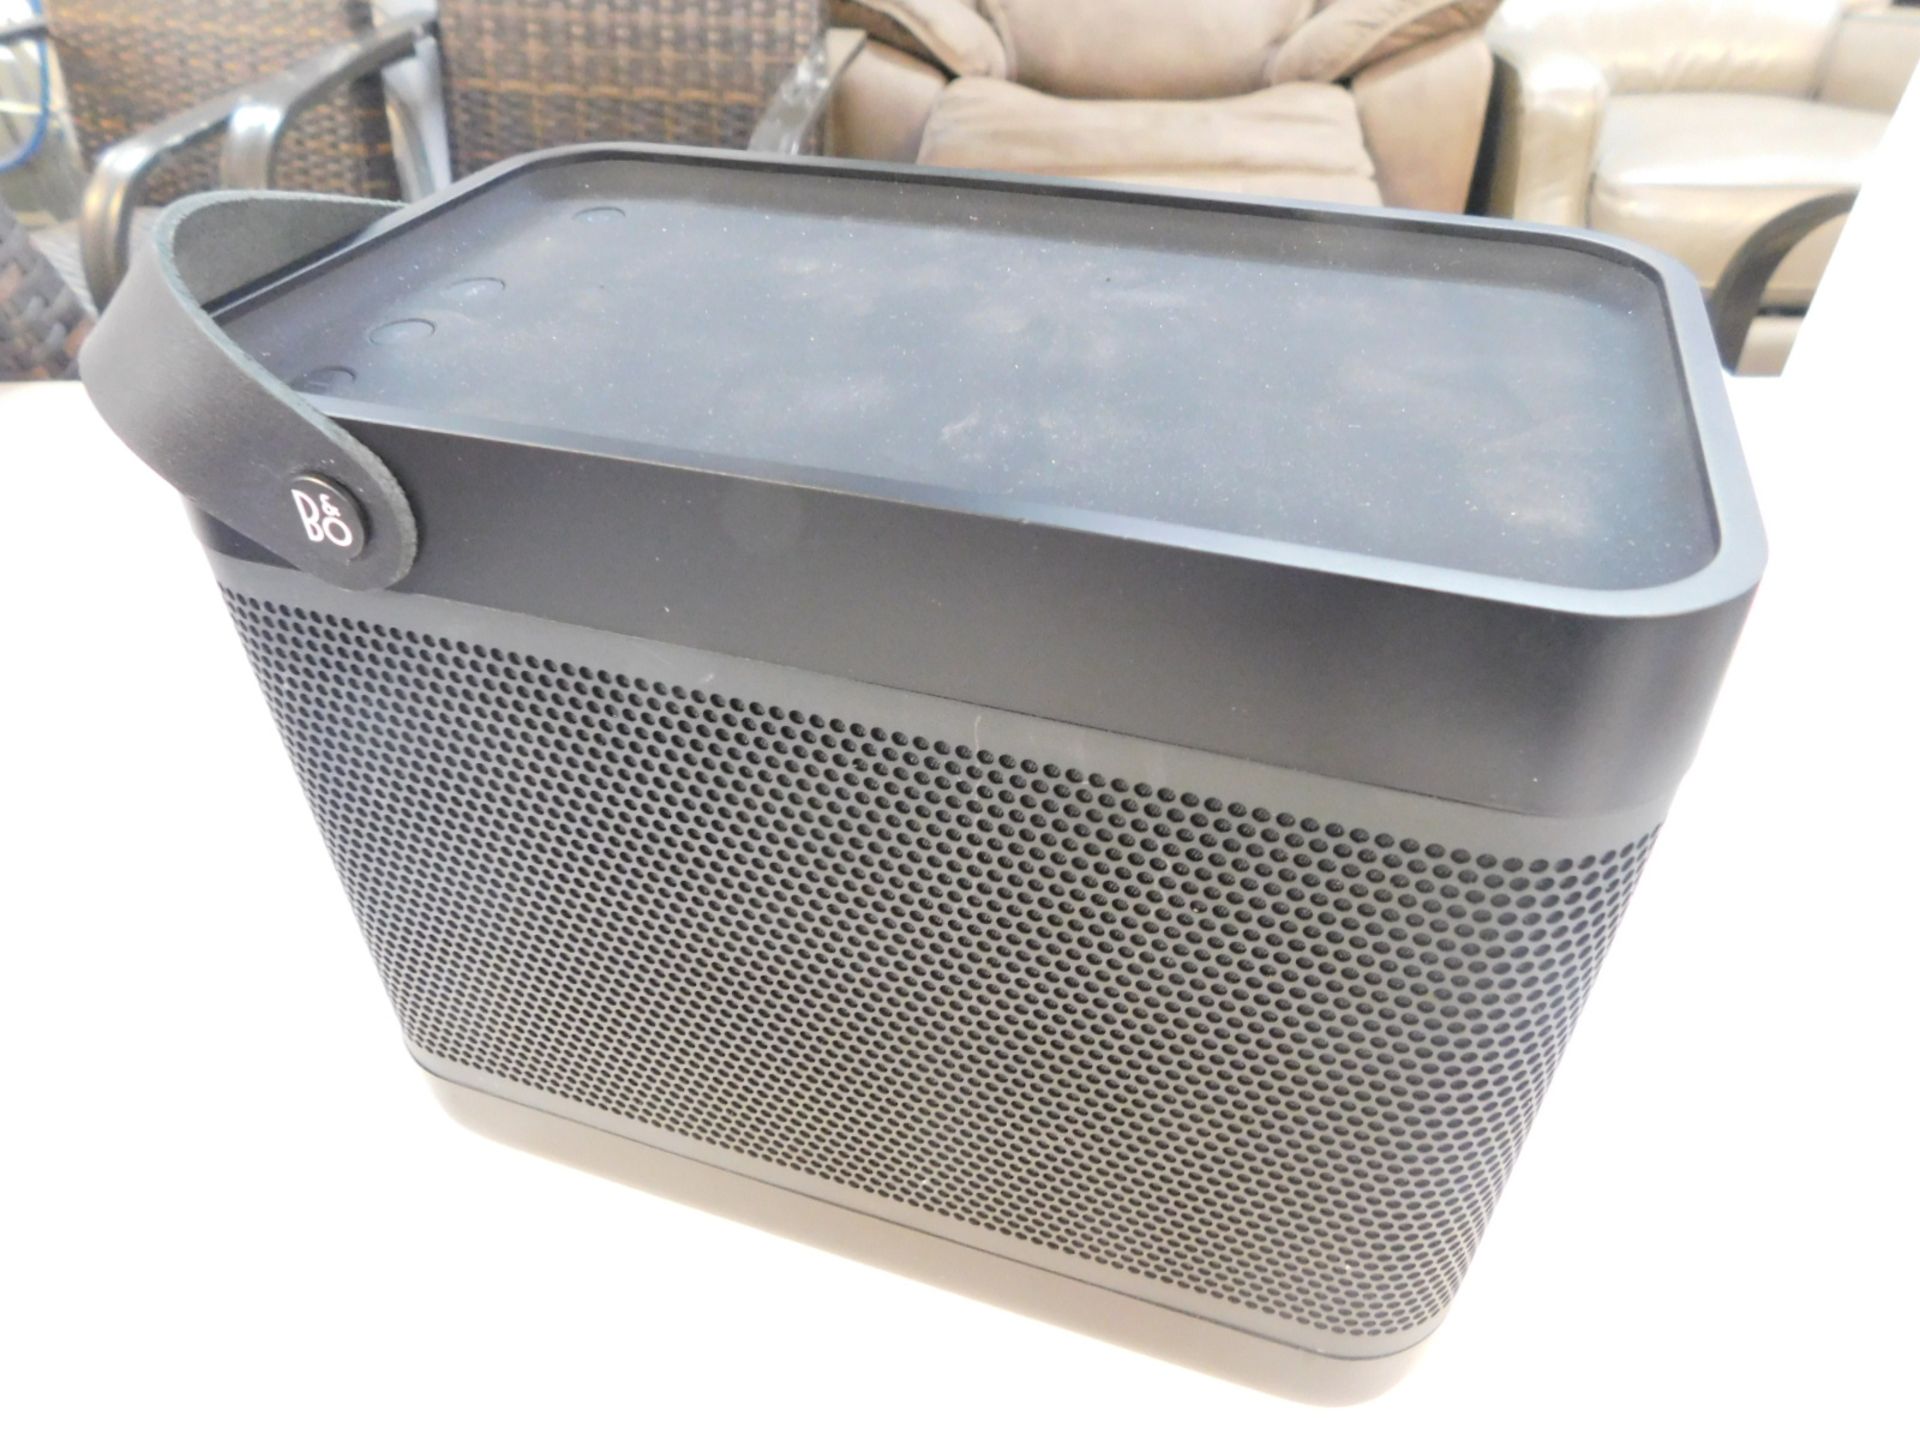 1 BANG AND OLUFSEN BEOLIT15 BLUETOOTH SPEAKER IN BLACK RRP £449